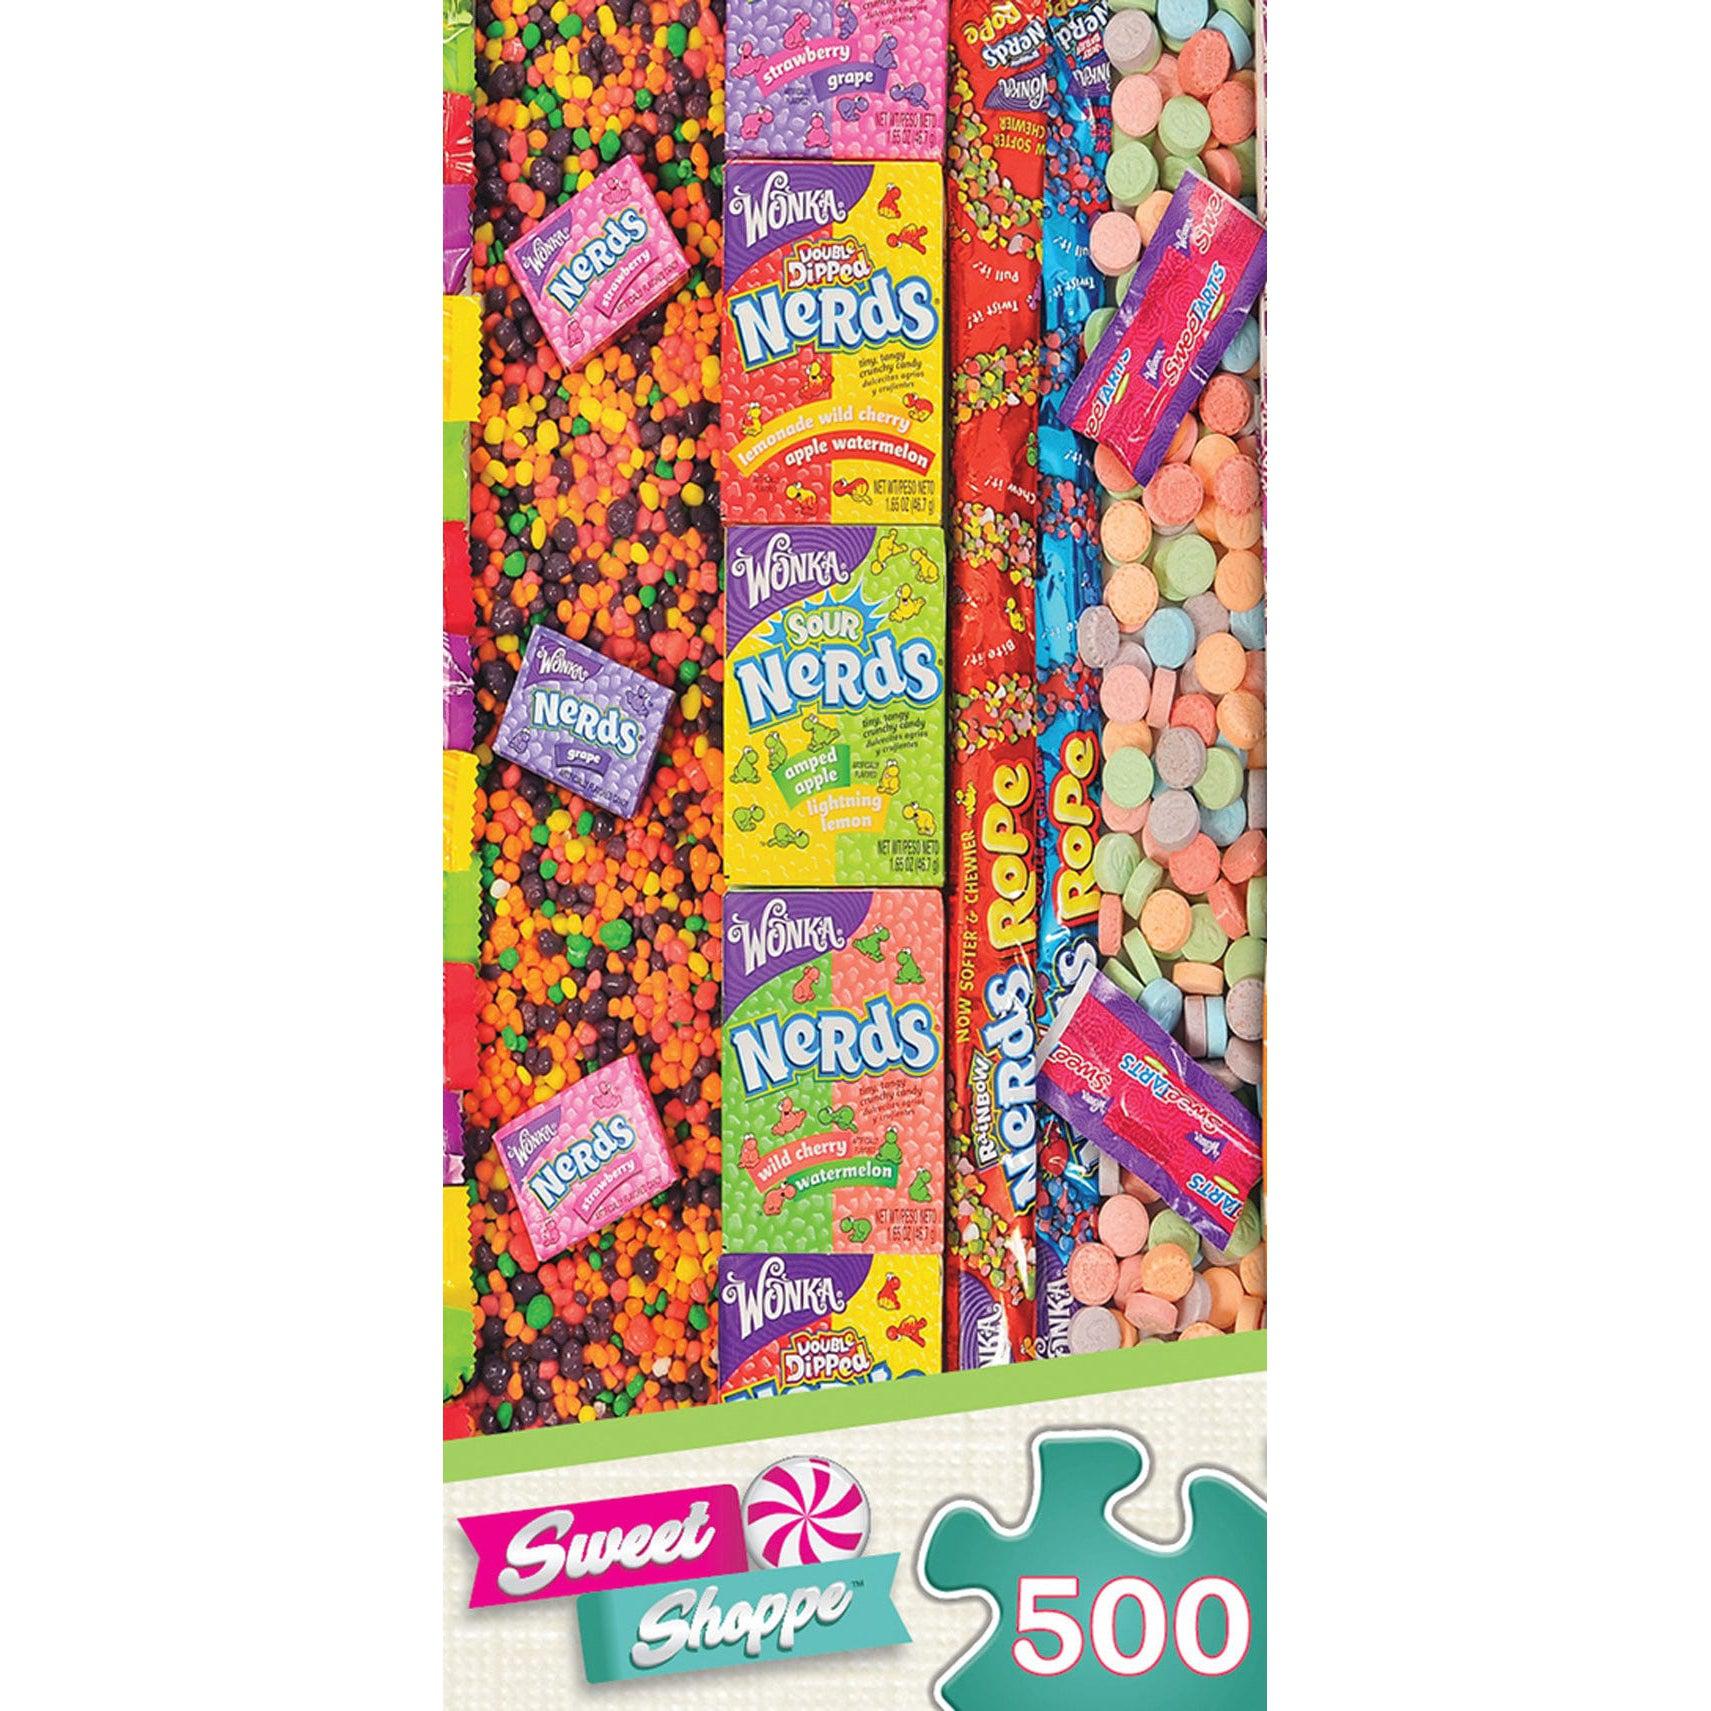 MasterPieces-Sweet Shoppe - Assortment - 500 Piece Puzzle-31968-Nerds for Life-Legacy Toys